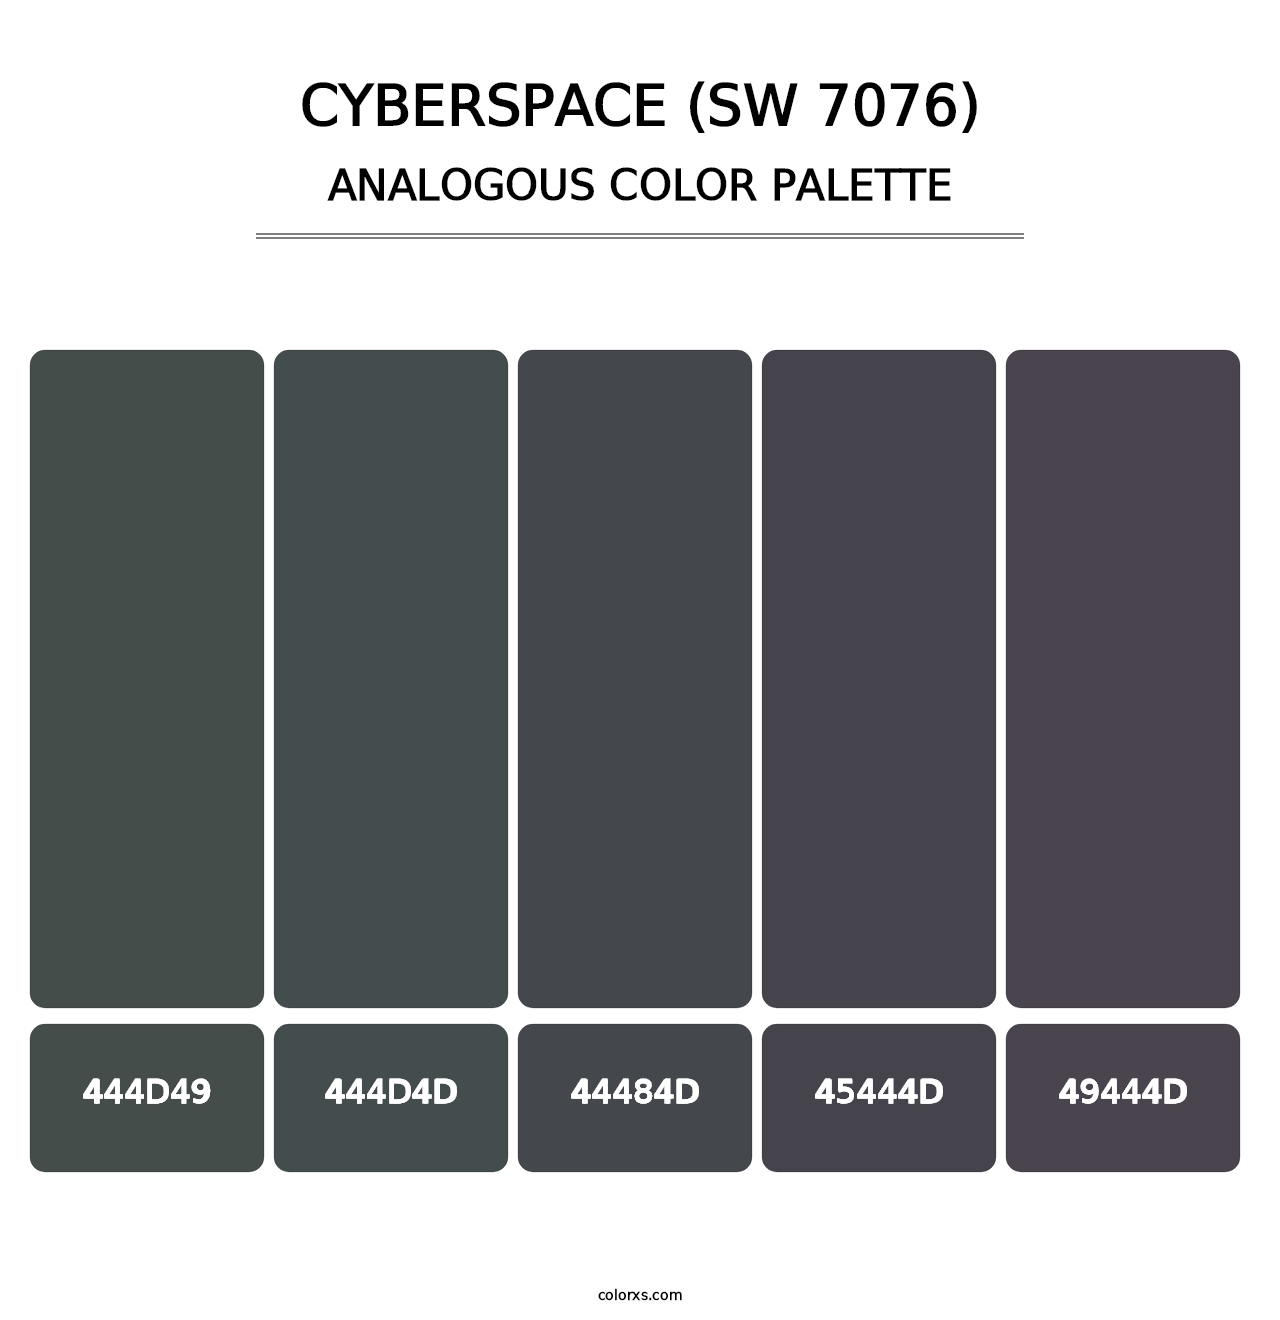 Cyberspace (SW 7076) - Analogous Color Palette